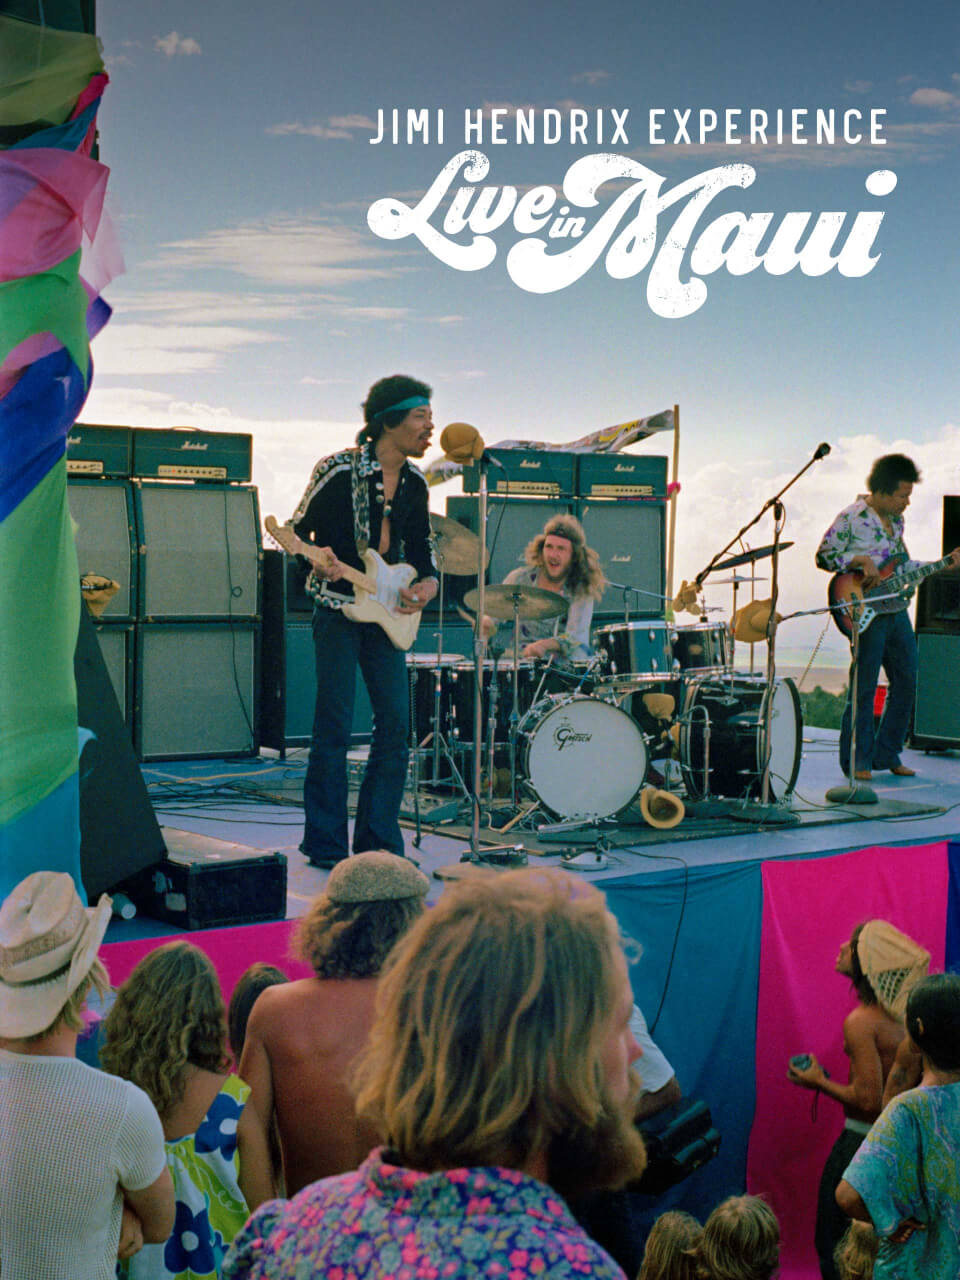 The Hendrix Experience - Live in Maui